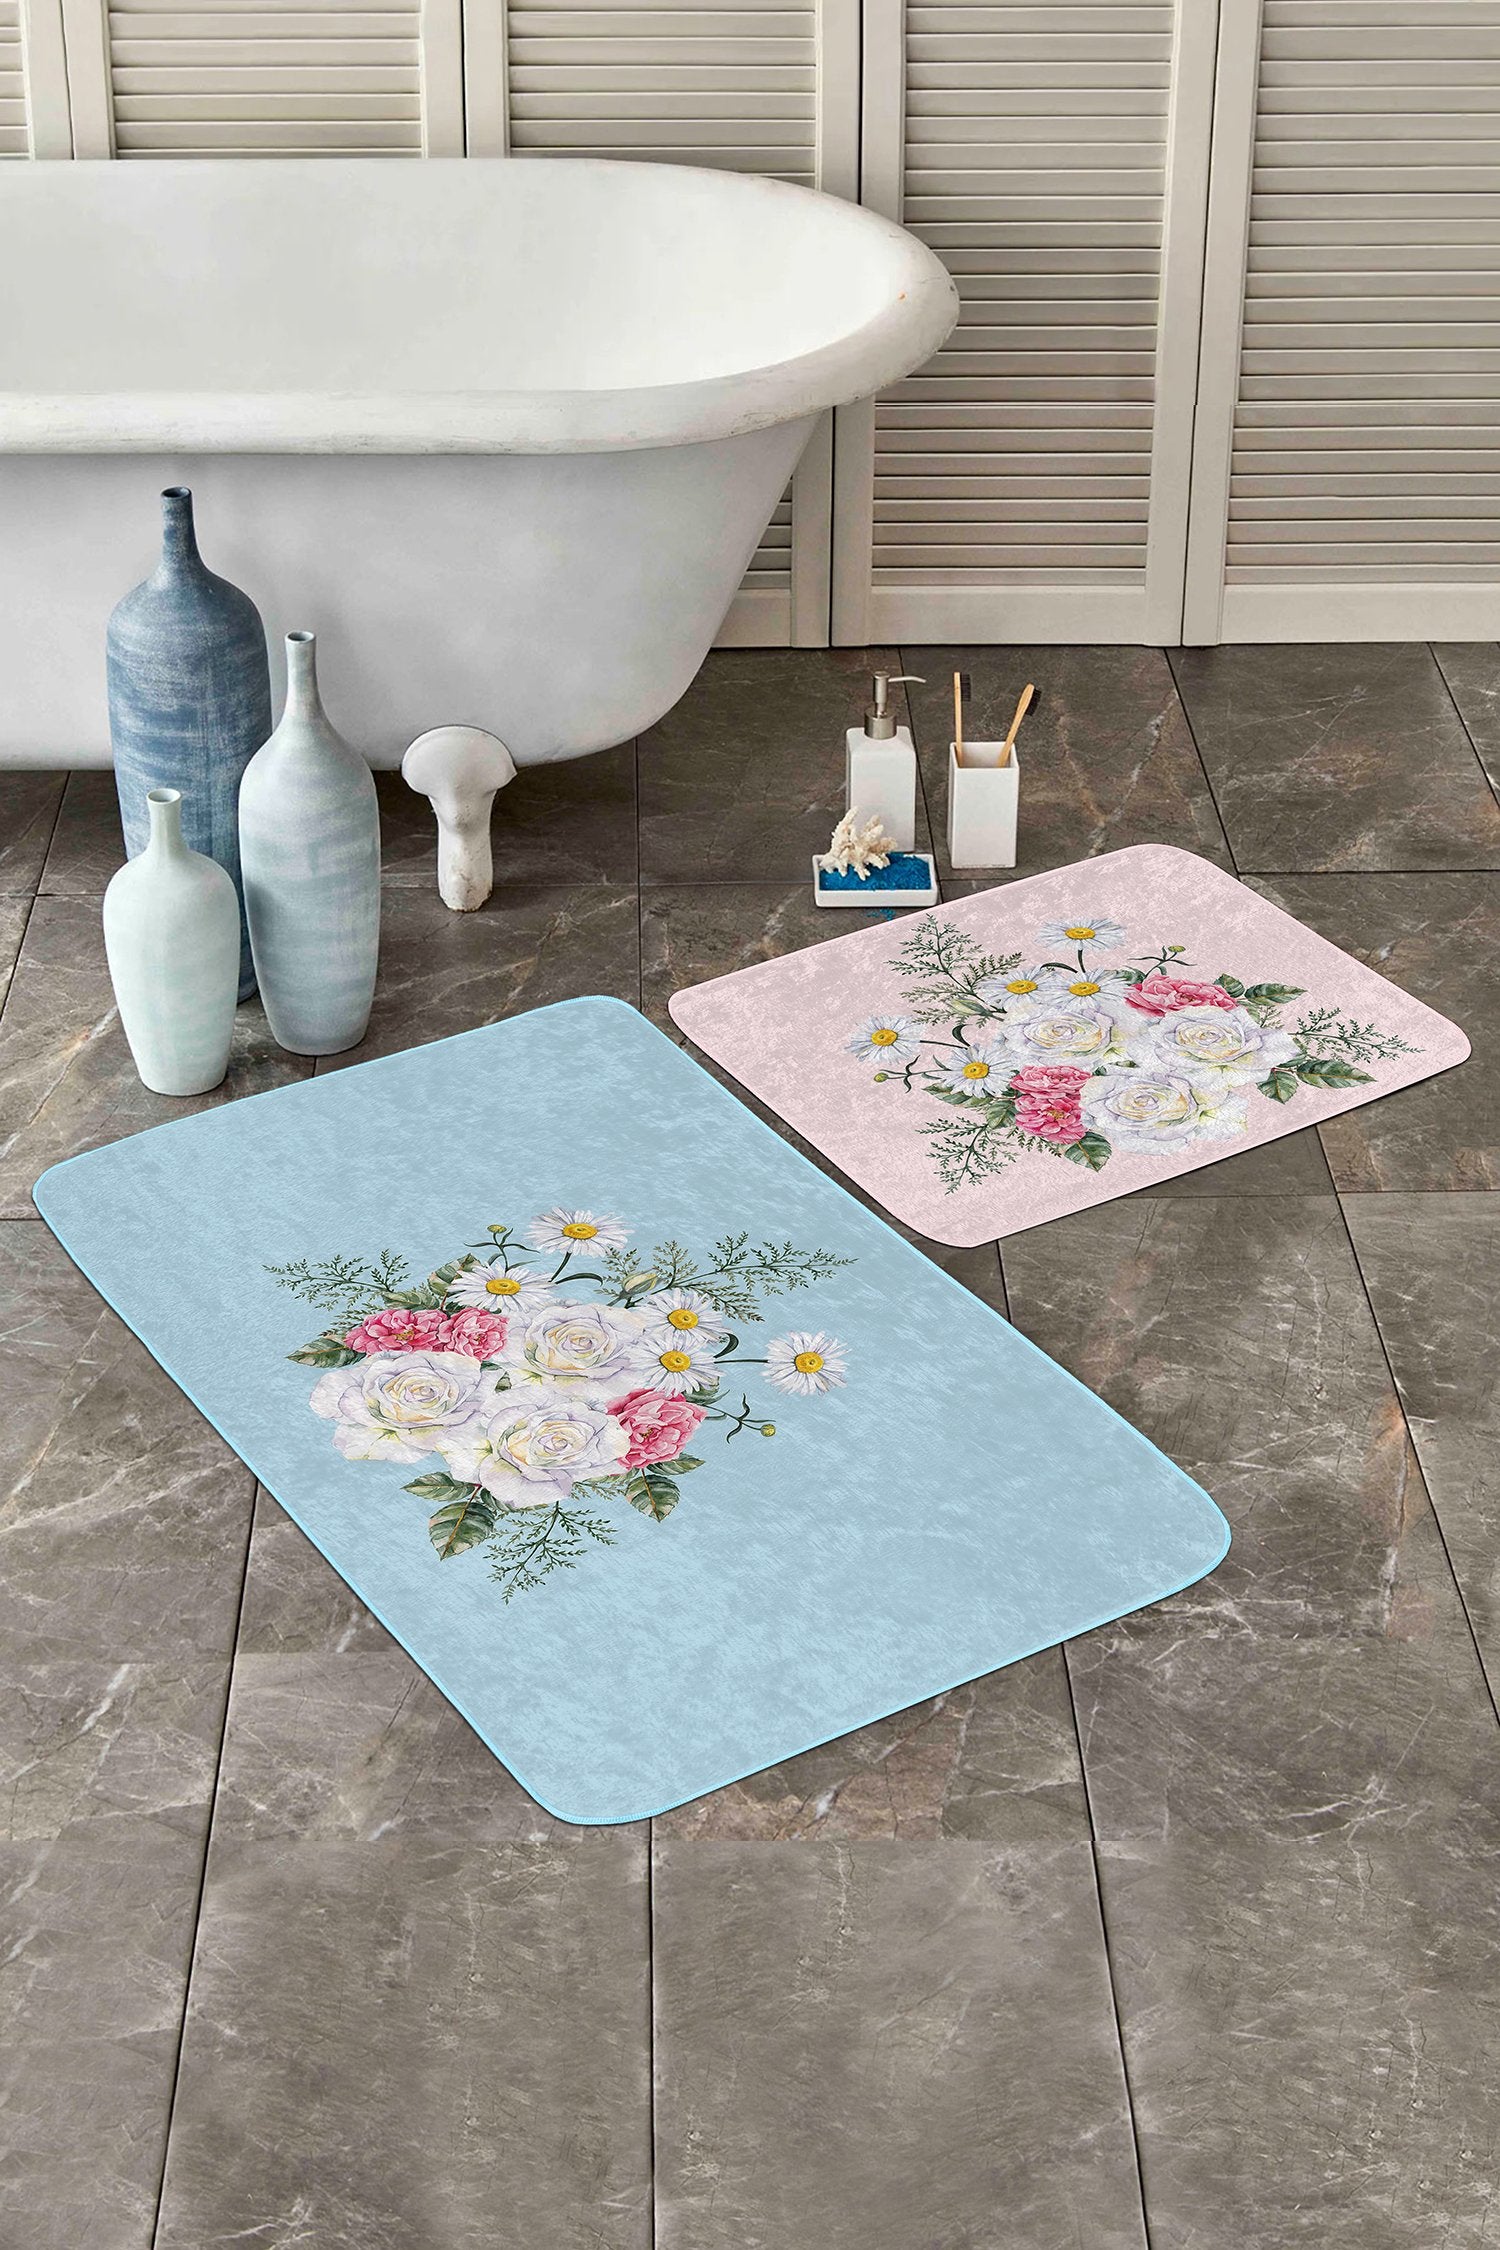 Functional and Stylish Bath Mat with Butterfly on Flowers Craftsmanship